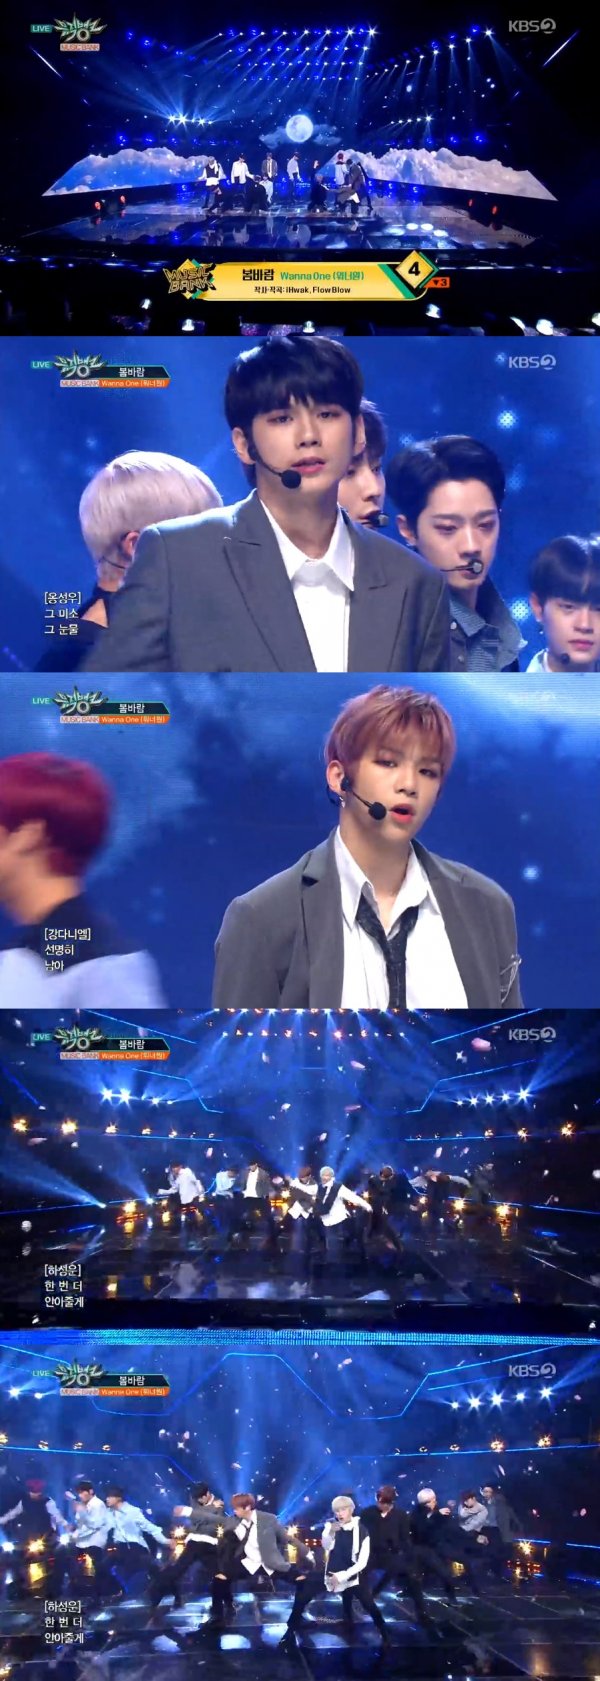 Group Wanna One presented the final stage of Music Bank.On KBS2s song program Music Bank, which aired on the afternoon of the 7th, Wanna One was shown a scene of decorating the Goodbye stage with Spring Wind.On that day, Wanna One presented the final stage of Music Bank, which attracted attention as its members came to the stage with costumes that featured their individuality.Wanna One The title song Spring Wind of this album contains the fate (DESTINY), which you and I have missed each other, but the will to meet again and become one again by fighting against the fate.On the other hand, Music Bank broadcasted on the same day includes 14U (One Pole), GOT7, THE BOYZ, Wanna One, Golden Child, Nature, New East W, Noir, Dream Notes (DreamNote), LaBOM, Lovelies, Red Velve T, Ben, Voysper, The Confussion, Uptension, Yubin (Yubin), Key, and others.